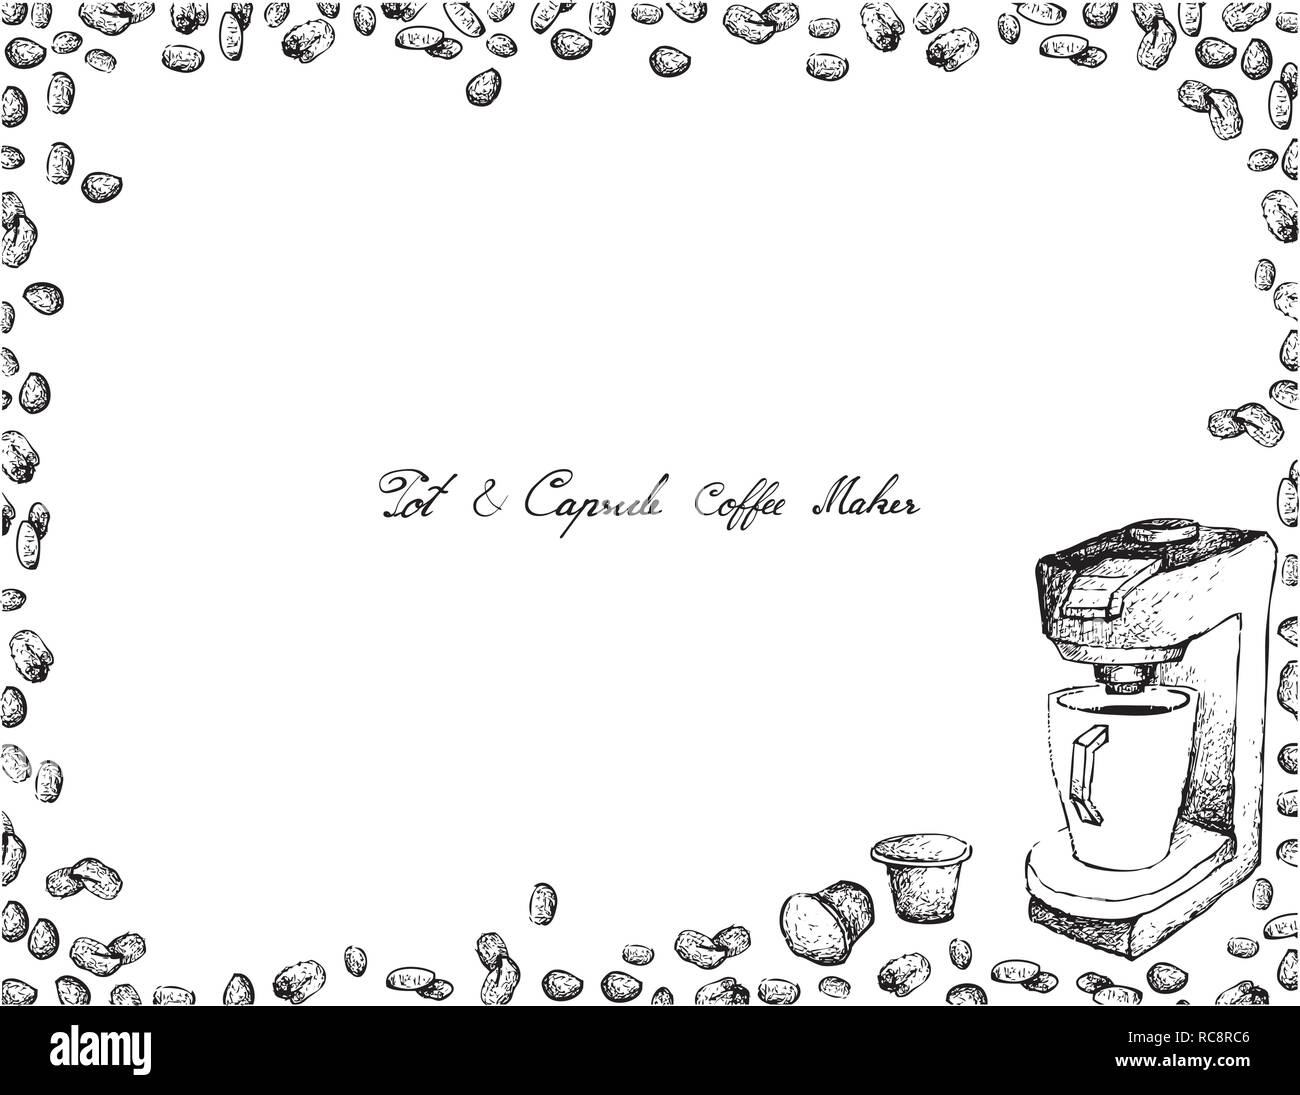 Illustration Hand Drawn Sketch of Coffee Beans and Pod or Capsule with Espresso Machine Isolated on White Background. An Appliance Used to Brew Coffee Stock Vector